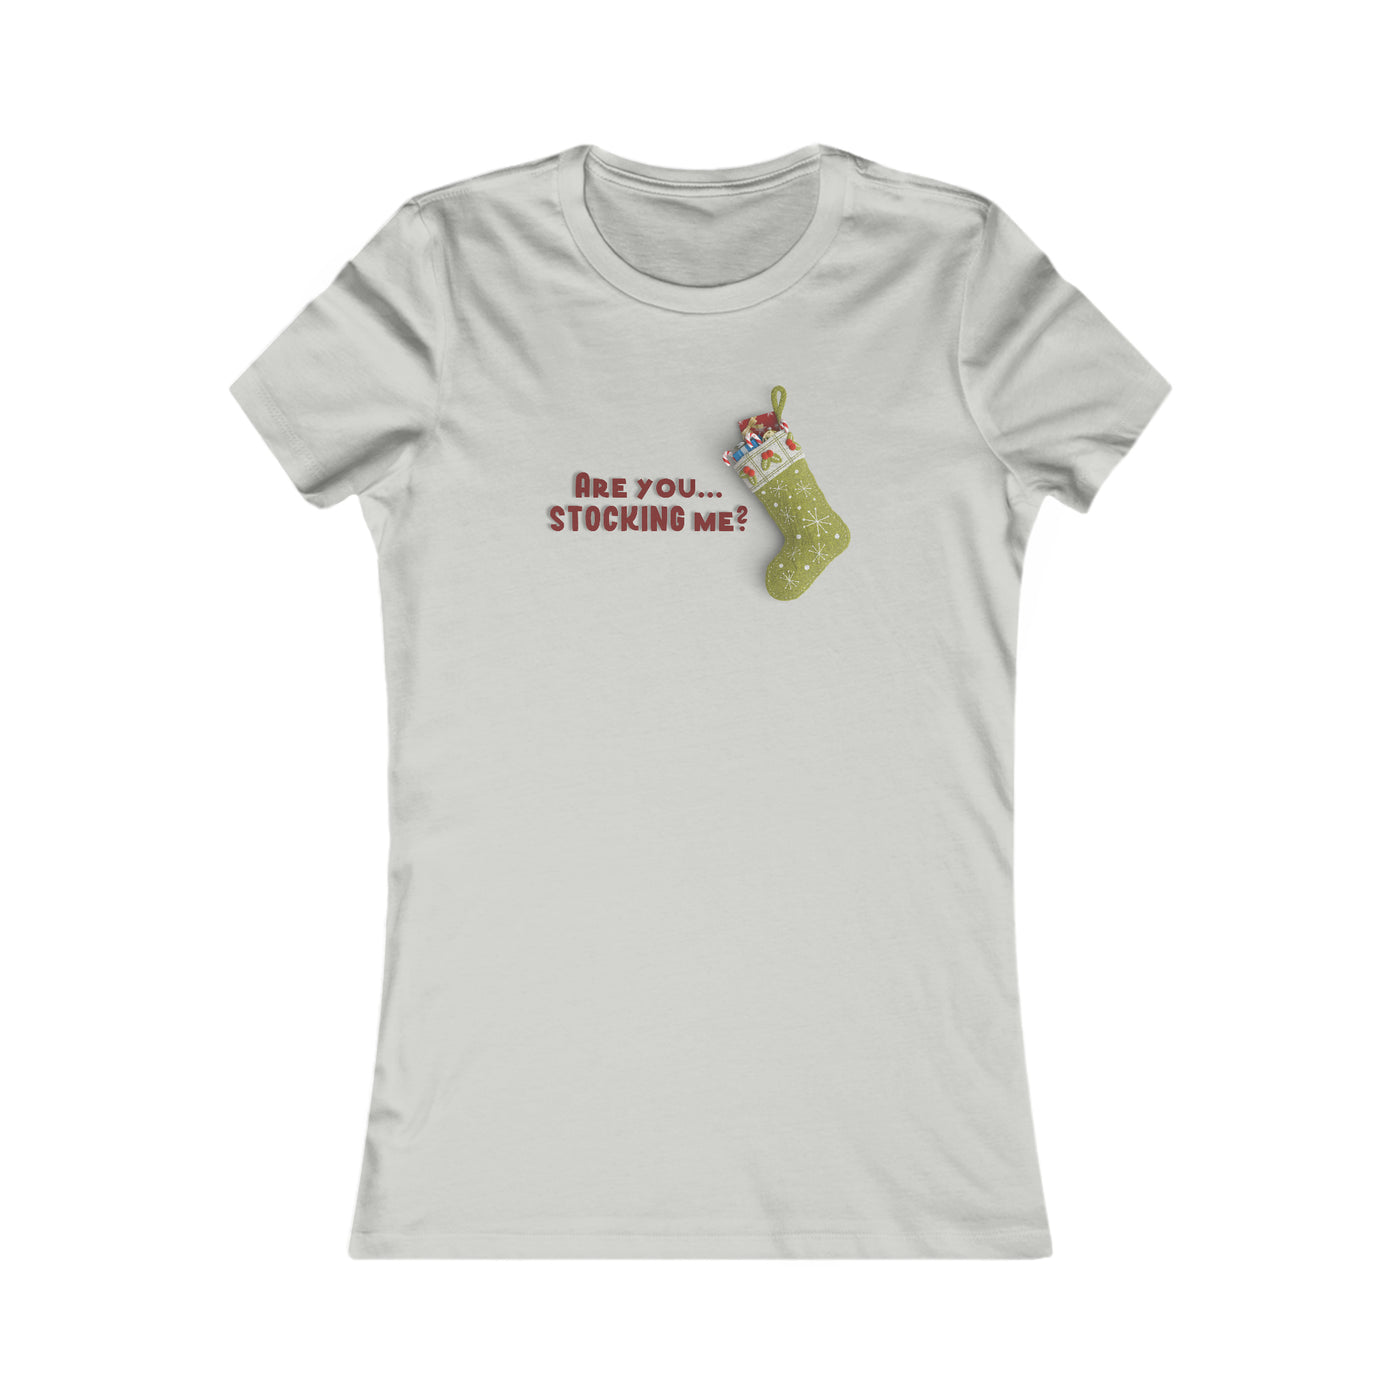 Are You Stocking Me? Women's Favorite Tee